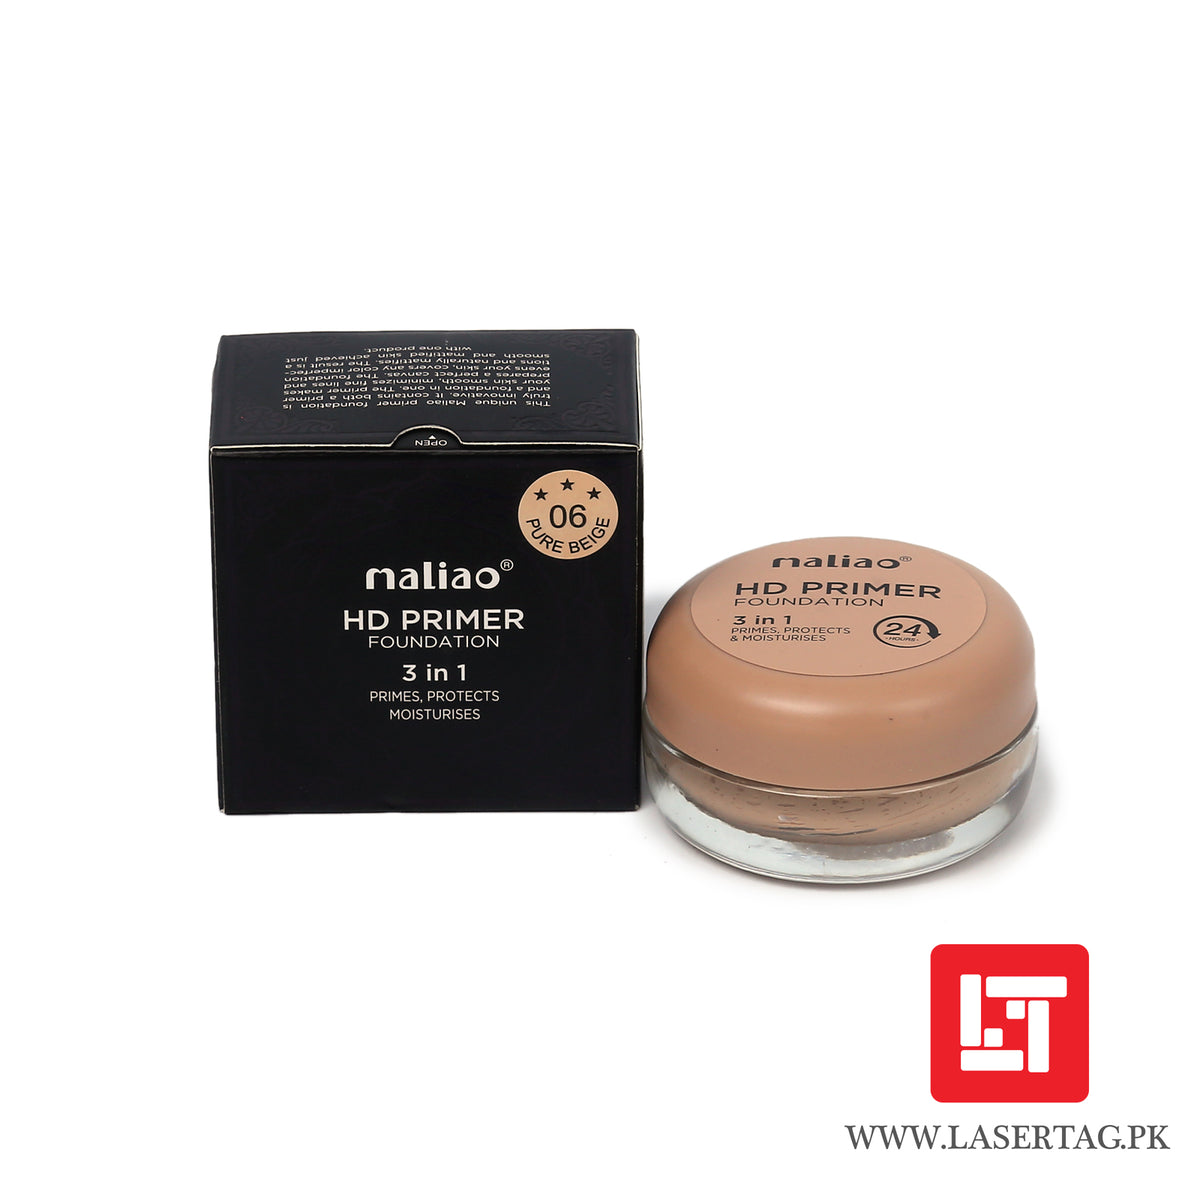 Maliao HD Primer Foundation 3 In 1 Primes, Protects, Moisturises Pure Beige M227-06 20g freeshipping - lasertag.pk